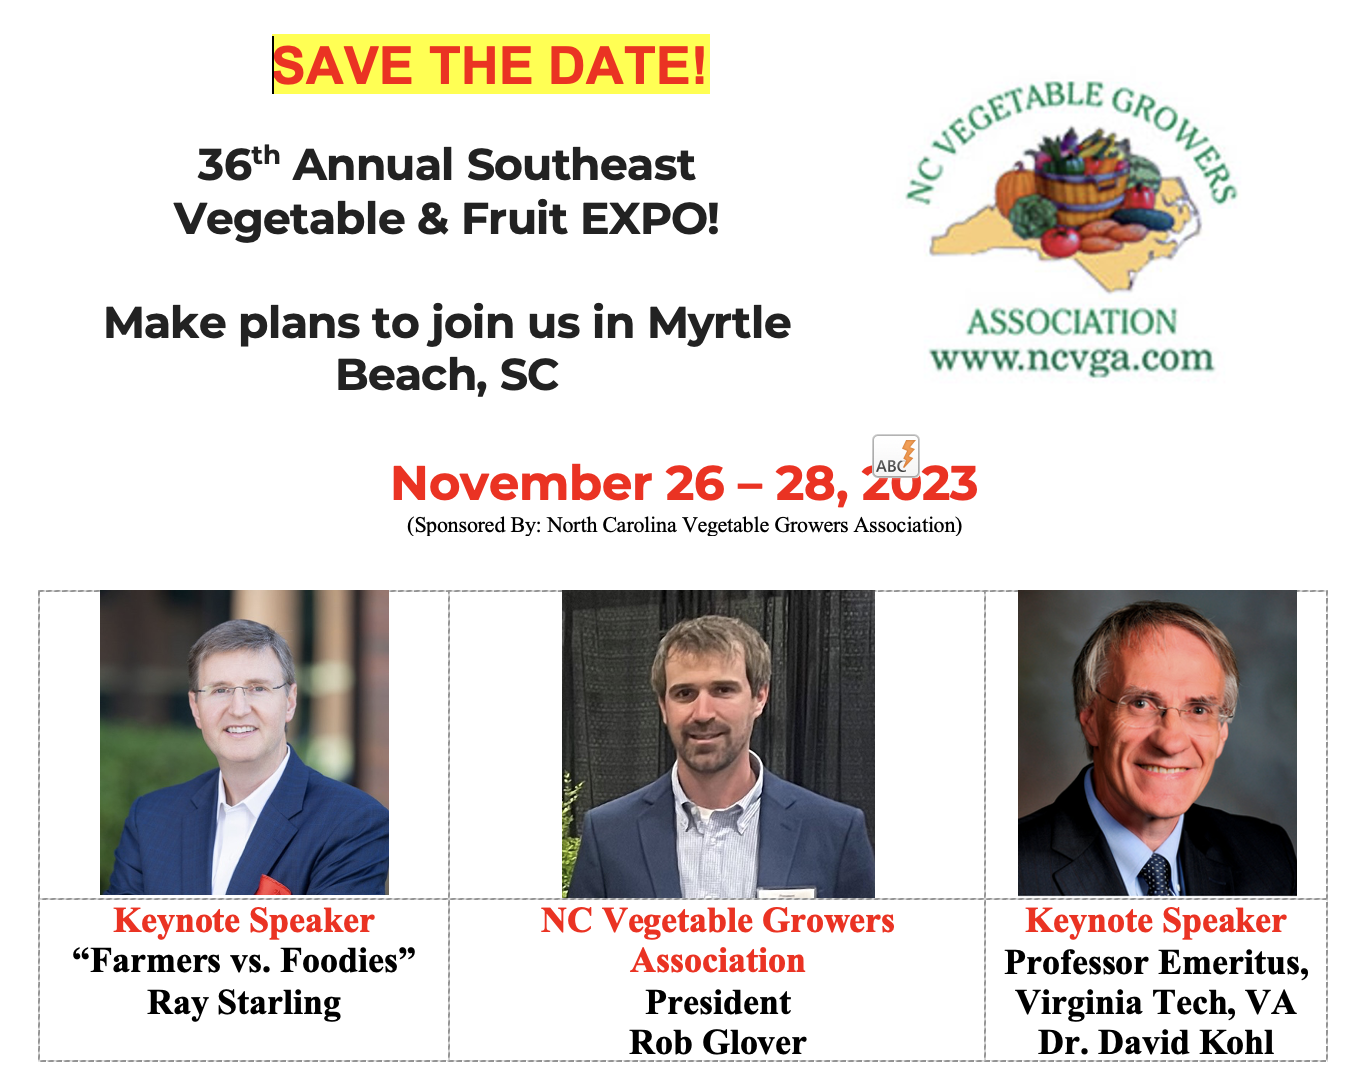 Save the Date! 36th Annual Southeast Vegetable & Fruit Expo!